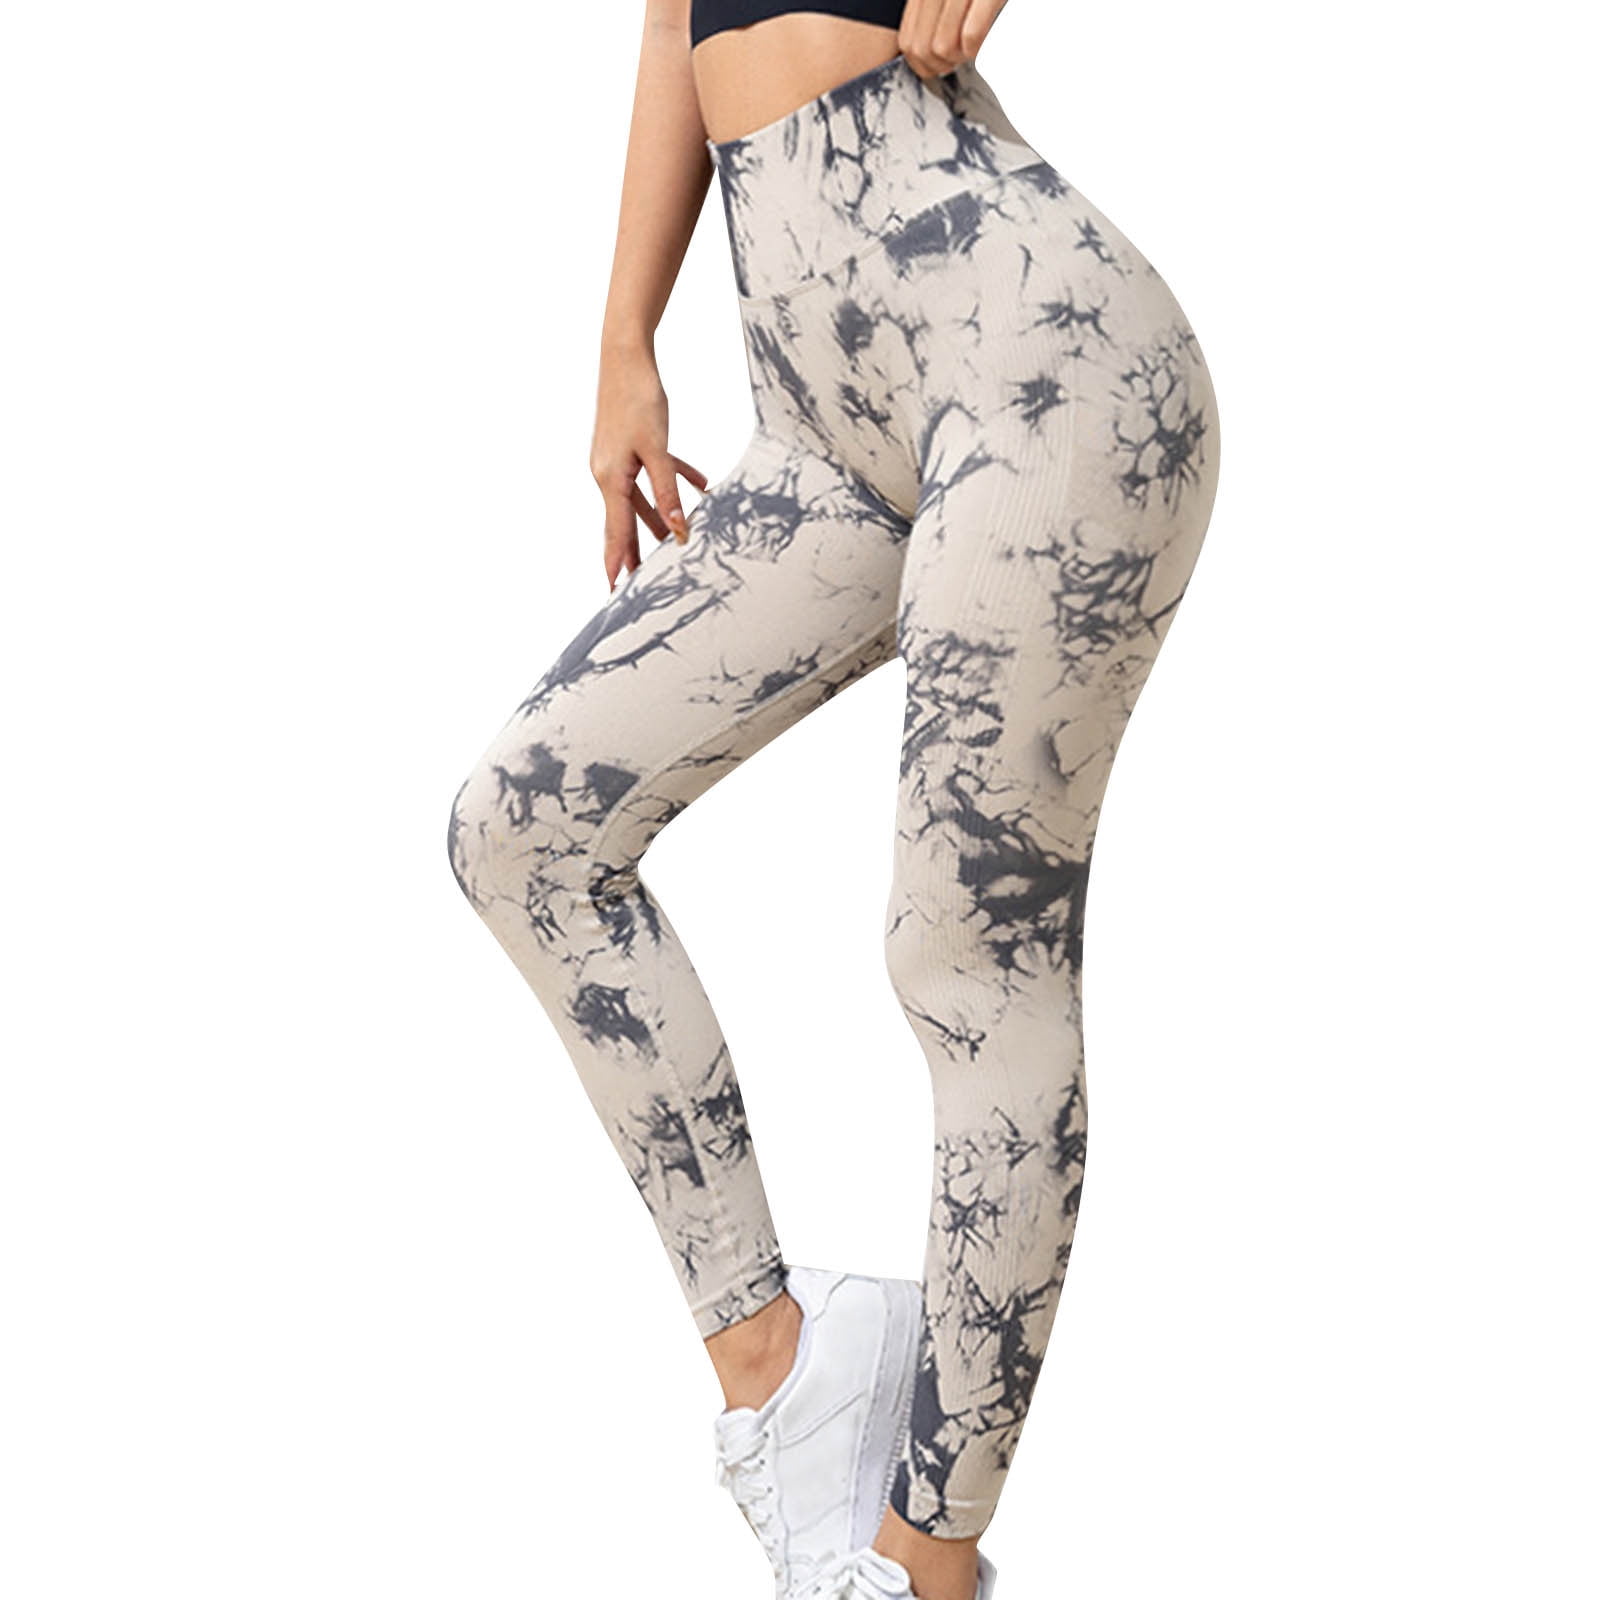 GetUSCart- ODODOS Women's Out Pockets High Waisted Pattern Yoga Pants,  Workout Sports Running Athletic Pattern Pants, Full-Length, Plus Size,  White Camo, XX-Large